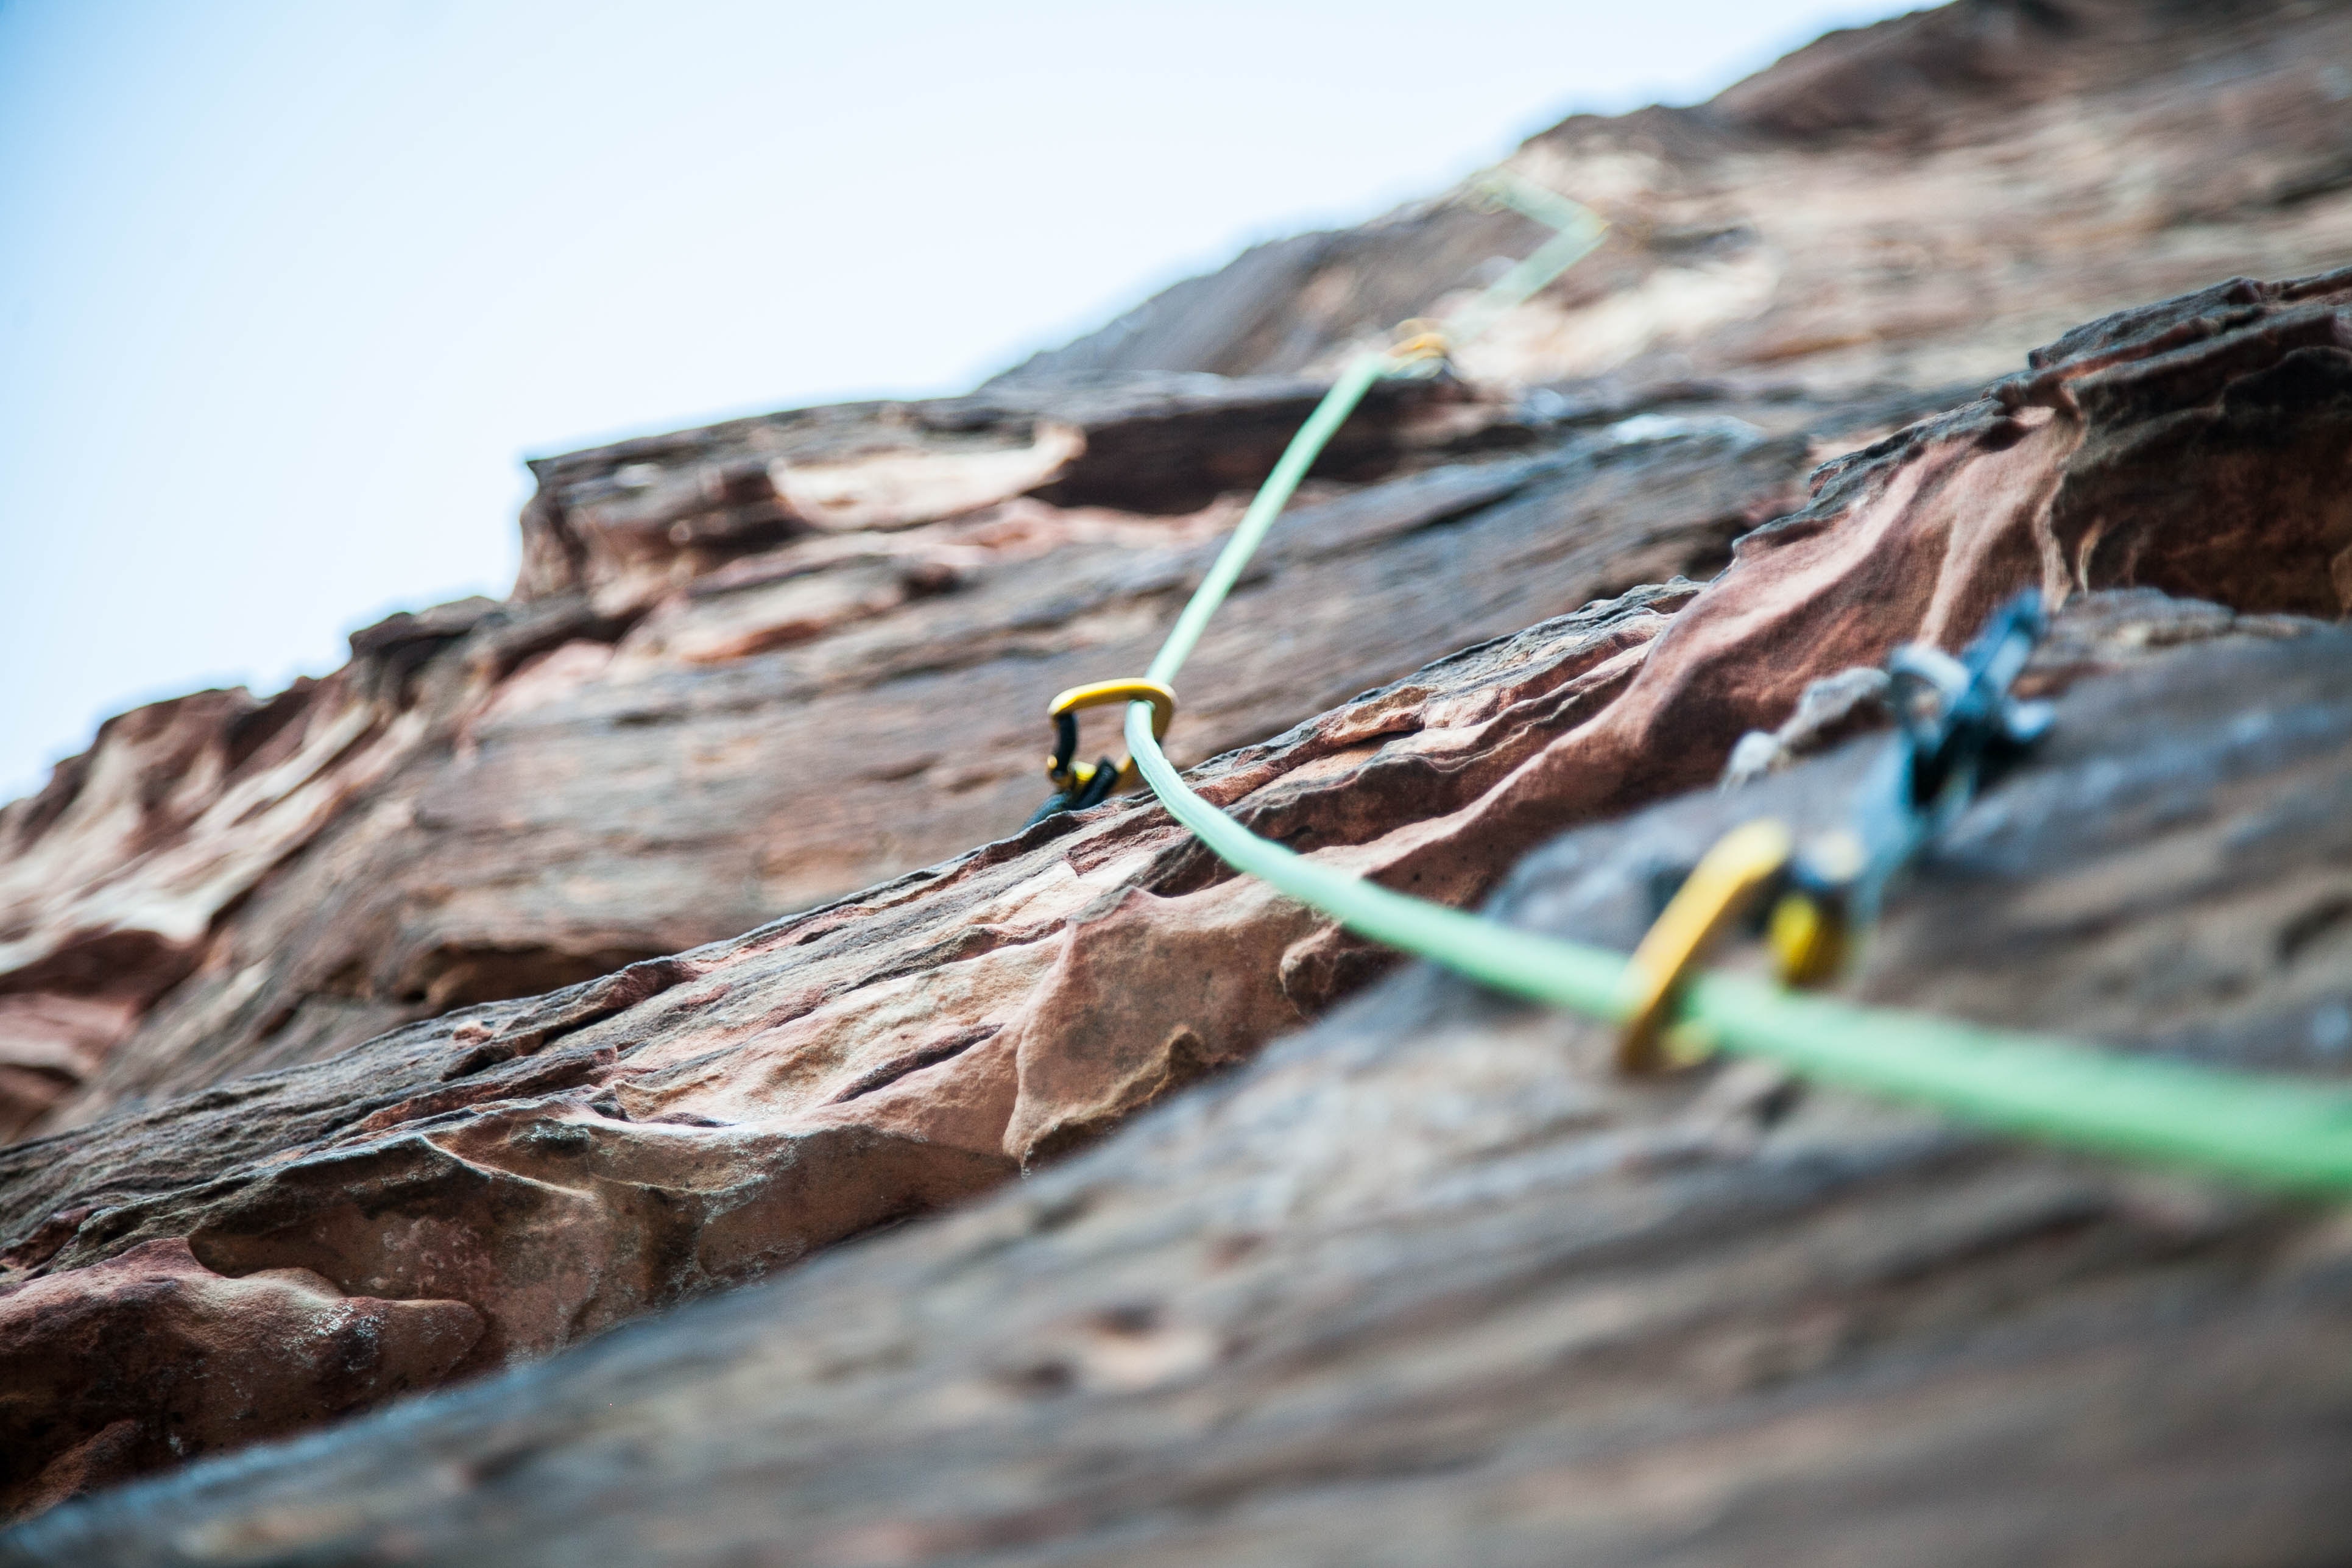 Climbing rope photo by Brook Anderson on Unsplash